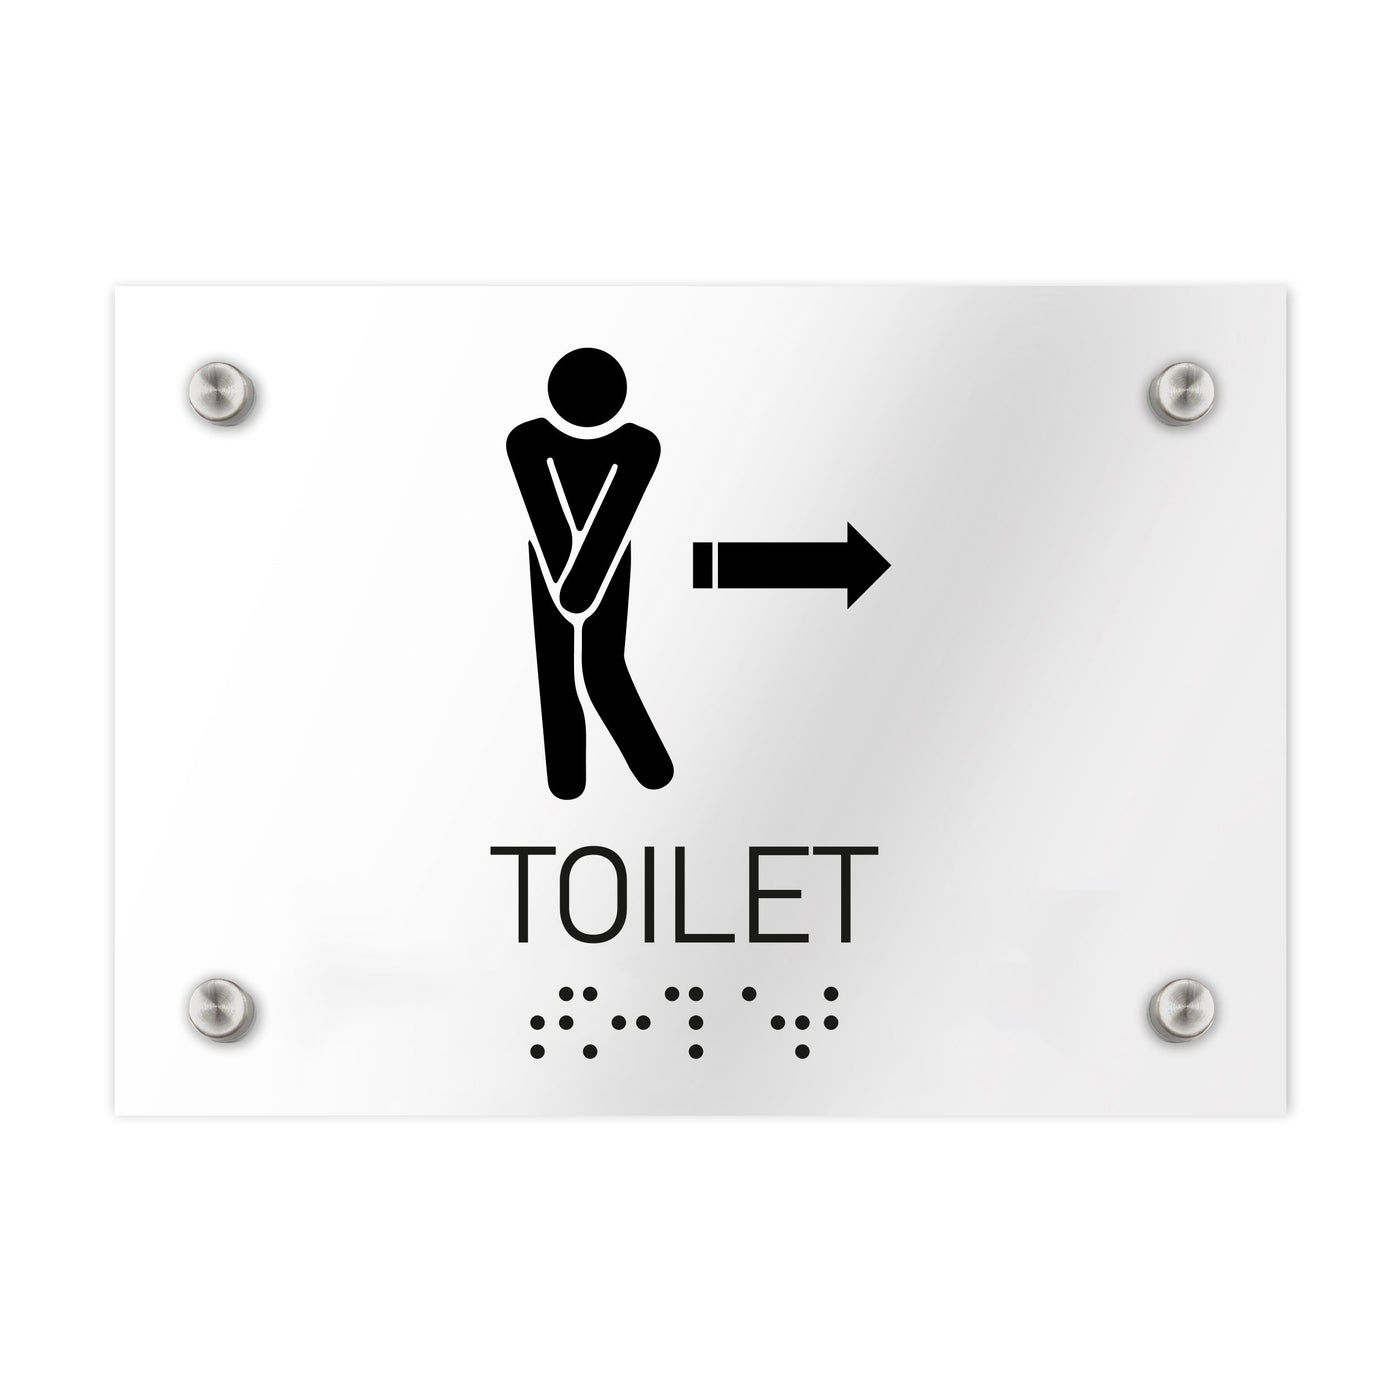 Bathroom Signs - Men Toilet Directional Sign - Clear Acrylic